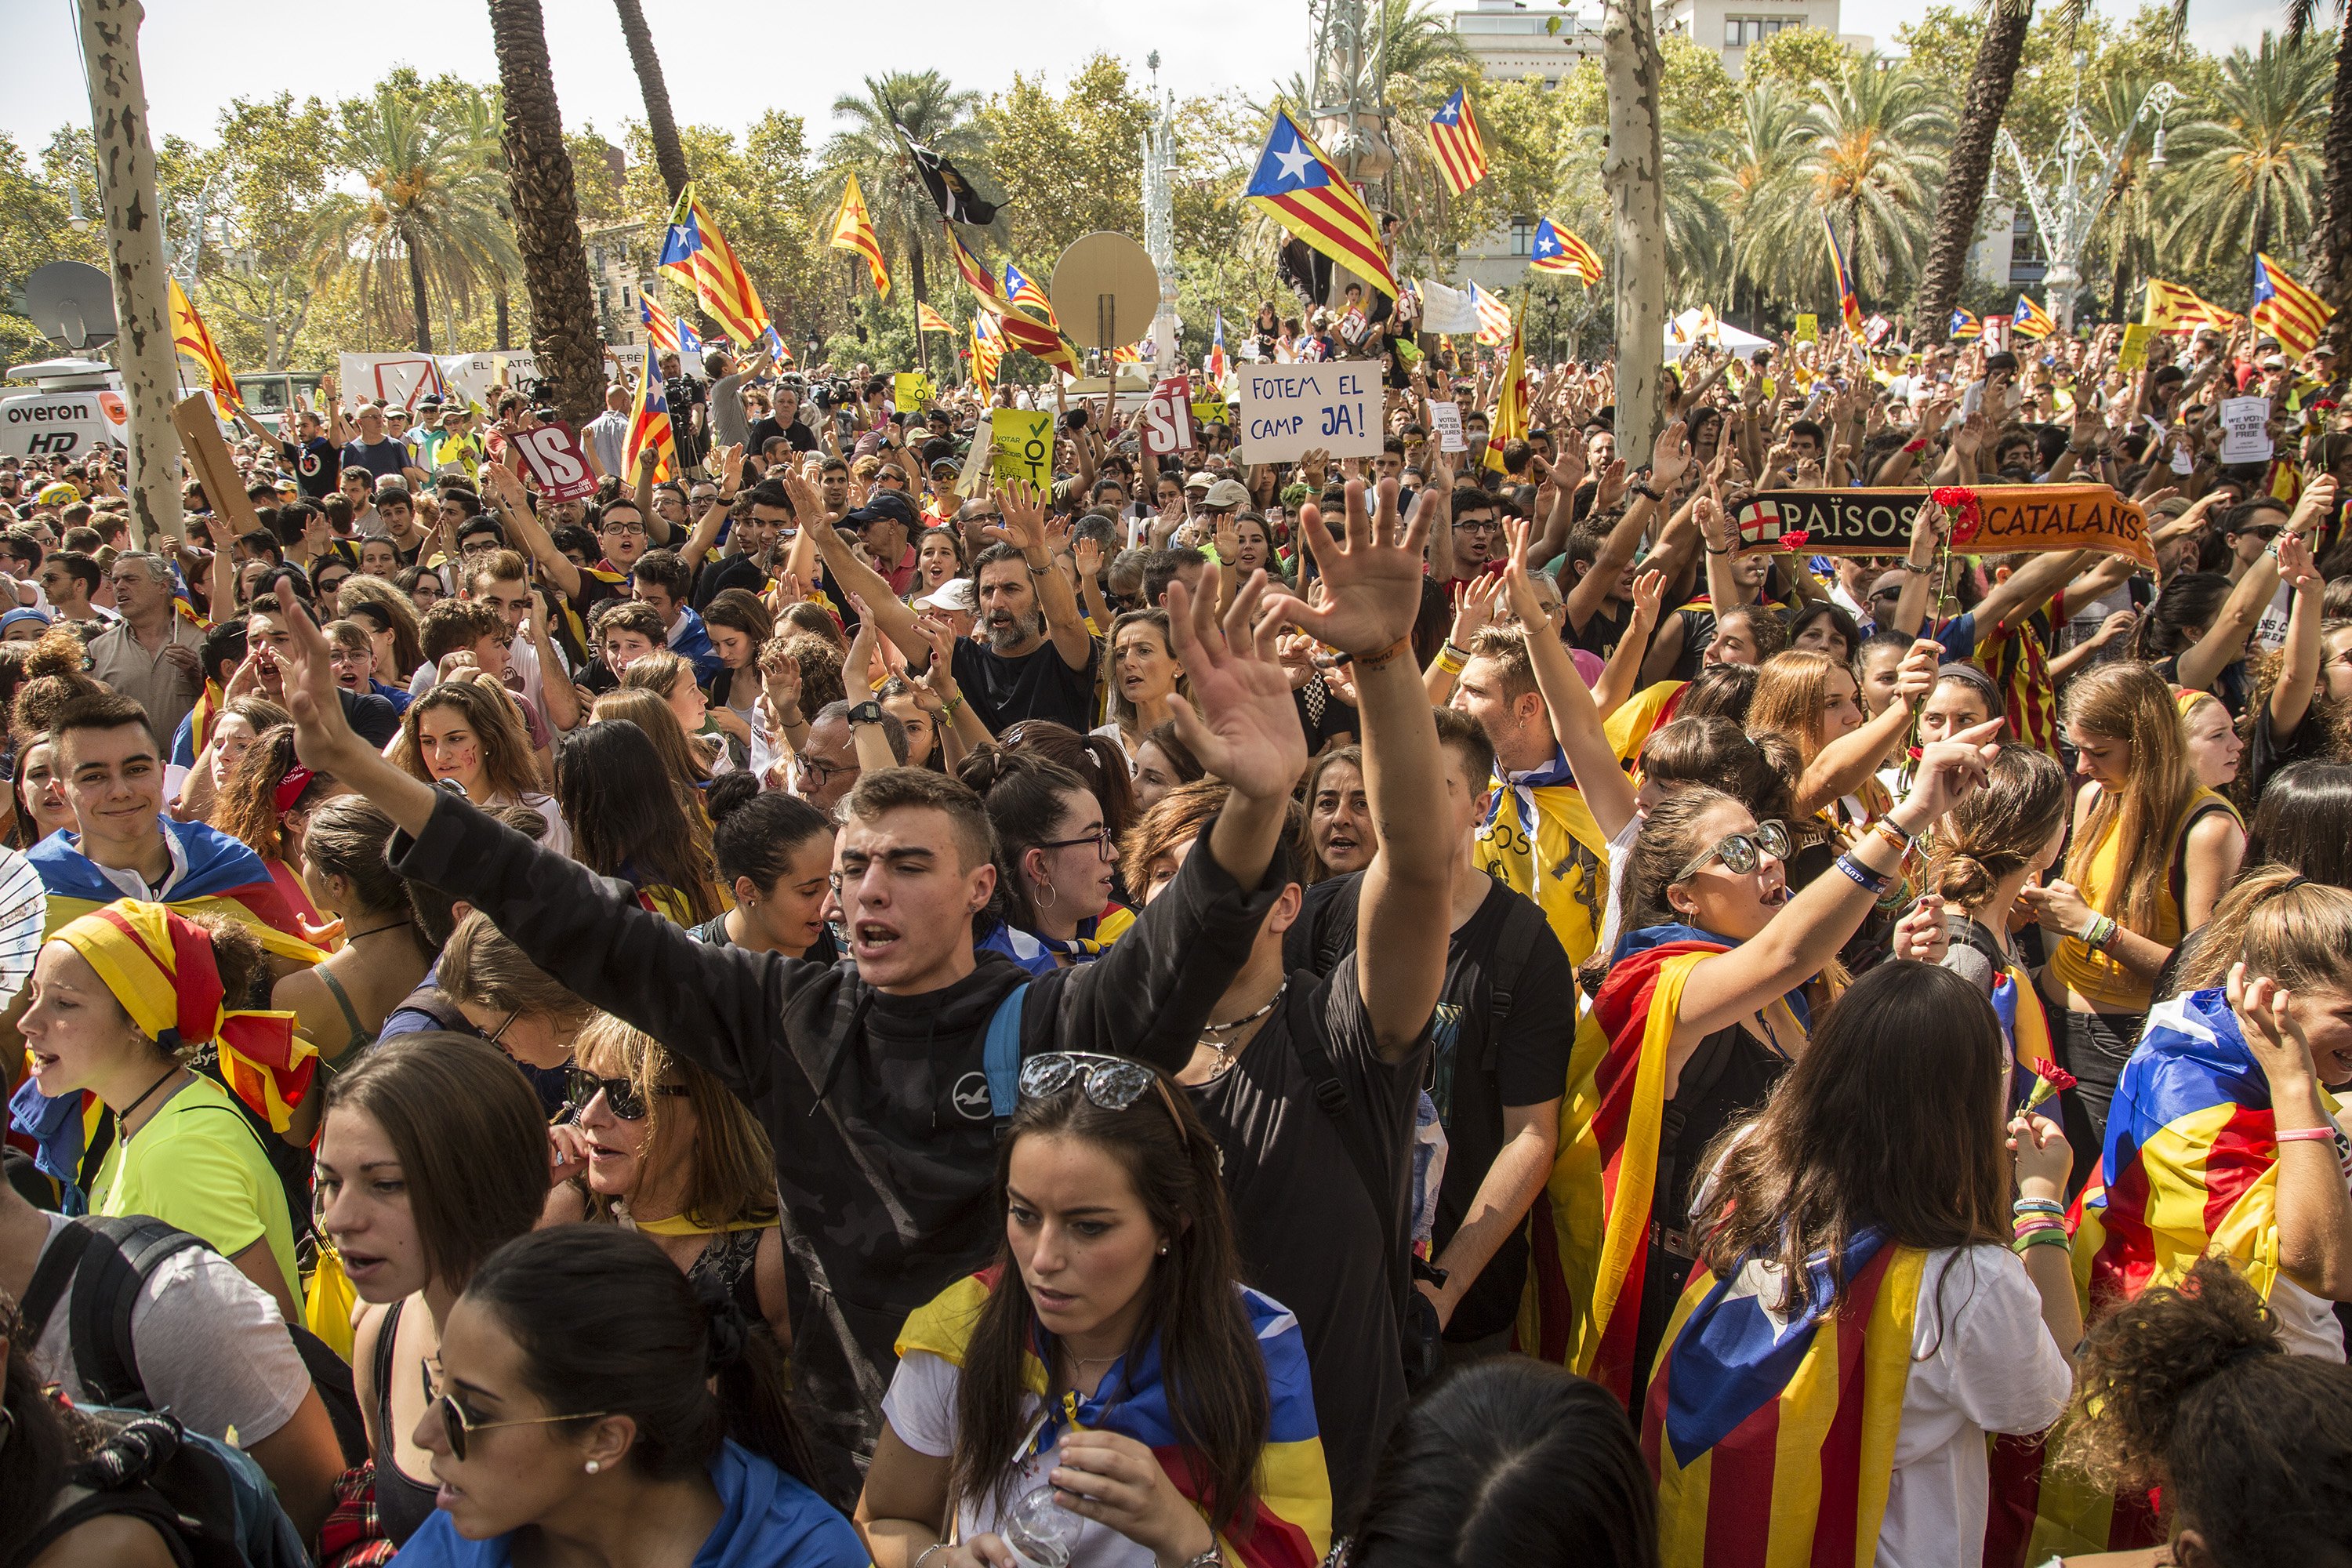 Major pro-independence organisation calls for rally at 6pm by Catalan Parliament